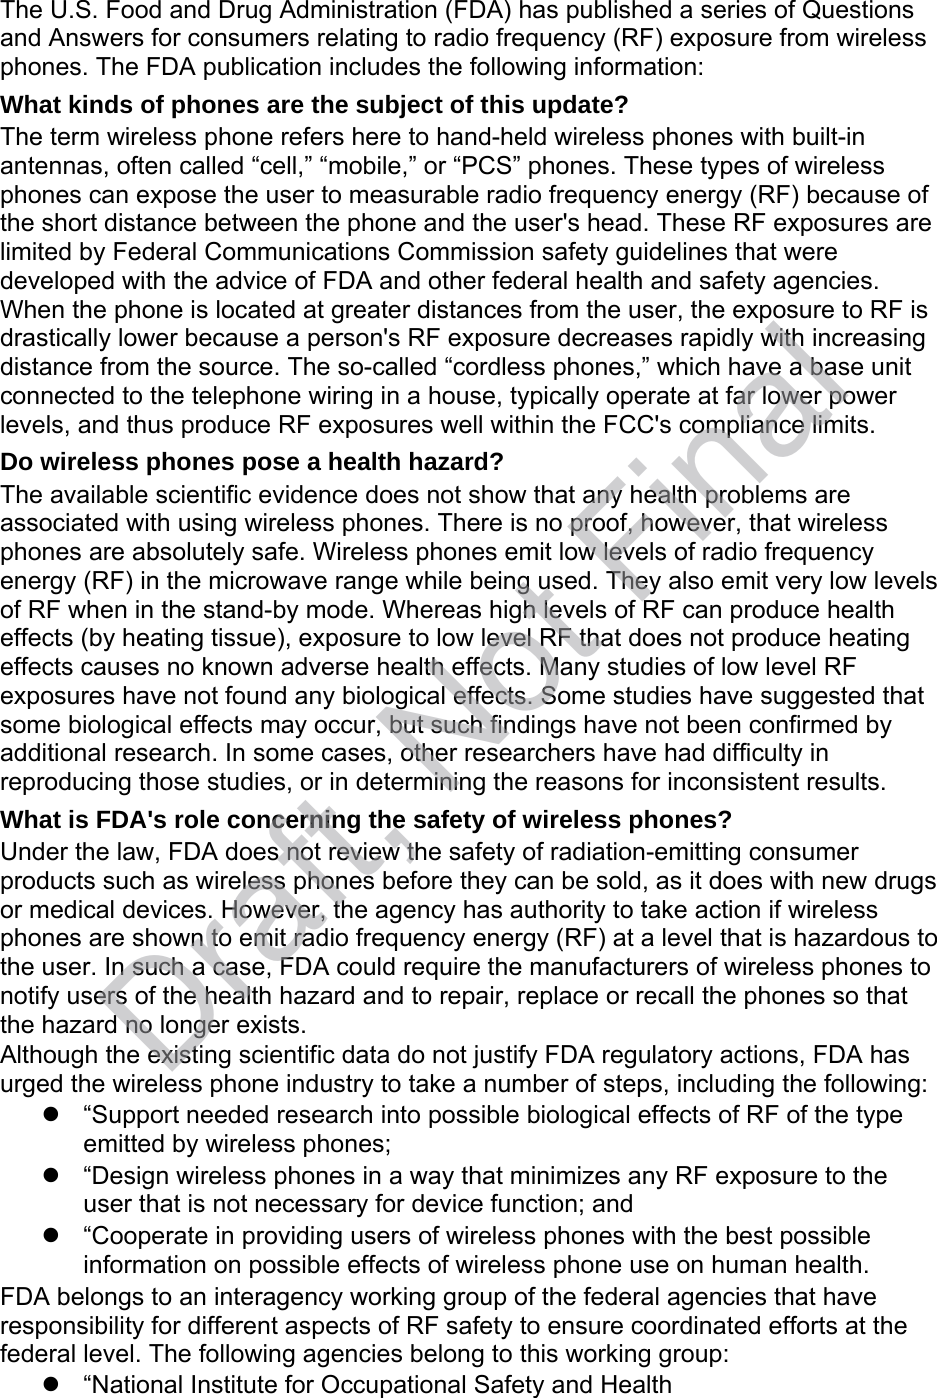 The U.S. Food and Drug Administration (FDA) has published a series of Questions and Answers for consumers relating to radio frequency (RF) exposure from wireless phones. The FDA publication includes the following information: What kinds of phones are the subject of this update? The term wireless phone refers here to hand-held wireless phones with built-in antennas, often called “cell,” “mobile,” or “PCS” phones. These types of wireless phones can expose the user to measurable radio frequency energy (RF) because of the short distance between the phone and the user&apos;s head. These RF exposures are limited by Federal Communications Commission safety guidelines that were developed with the advice of FDA and other federal health and safety agencies. When the phone is located at greater distances from the user, the exposure to RF is drastically lower because a person&apos;s RF exposure decreases rapidly with increasing distance from the source. The so-called “cordless phones,” which have a base unit connected to the telephone wiring in a house, typically operate at far lower power levels, and thus produce RF exposures well within the FCC&apos;s compliance limits. Do wireless phones pose a health hazard? The available scientific evidence does not show that any health problems are associated with using wireless phones. There is no proof, however, that wireless phones are absolutely safe. Wireless phones emit low levels of radio frequency energy (RF) in the microwave range while being used. They also emit very low levels of RF when in the stand-by mode. Whereas high levels of RF can produce health effects (by heating tissue), exposure to low level RF that does not produce heating effects causes no known adverse health effects. Many studies of low level RF exposures have not found any biological effects. Some studies have suggested that some biological effects may occur, but such findings have not been confirmed by additional research. In some cases, other researchers have had difficulty in reproducing those studies, or in determining the reasons for inconsistent results. What is FDA&apos;s role concerning the safety of wireless phones? Under the law, FDA does not review the safety of radiation-emitting consumer products such as wireless phones before they can be sold, as it does with new drugs or medical devices. However, the agency has authority to take action if wireless phones are shown to emit radio frequency energy (RF) at a level that is hazardous to the user. In such a case, FDA could require the manufacturers of wireless phones to notify users of the health hazard and to repair, replace or recall the phones so that the hazard no longer exists. Although the existing scientific data do not justify FDA regulatory actions, FDA has urged the wireless phone industry to take a number of steps, including the following: “Support needed research into possible biological effects of RF of the typeemitted by wireless phones;“Design wireless phones in a way that minimizes any RF exposure to theuser that is not necessary for device function; and“Cooperate in providing users of wireless phones with the best possibleinformation on possible effects of wireless phone use on human health.FDA belongs to an interagency working group of the federal agencies that have responsibility for different aspects of RF safety to ensure coordinated efforts at the federal level. The following agencies belong to this working group: “National Institute for Occupational Safety and HealthDraft, Not Final